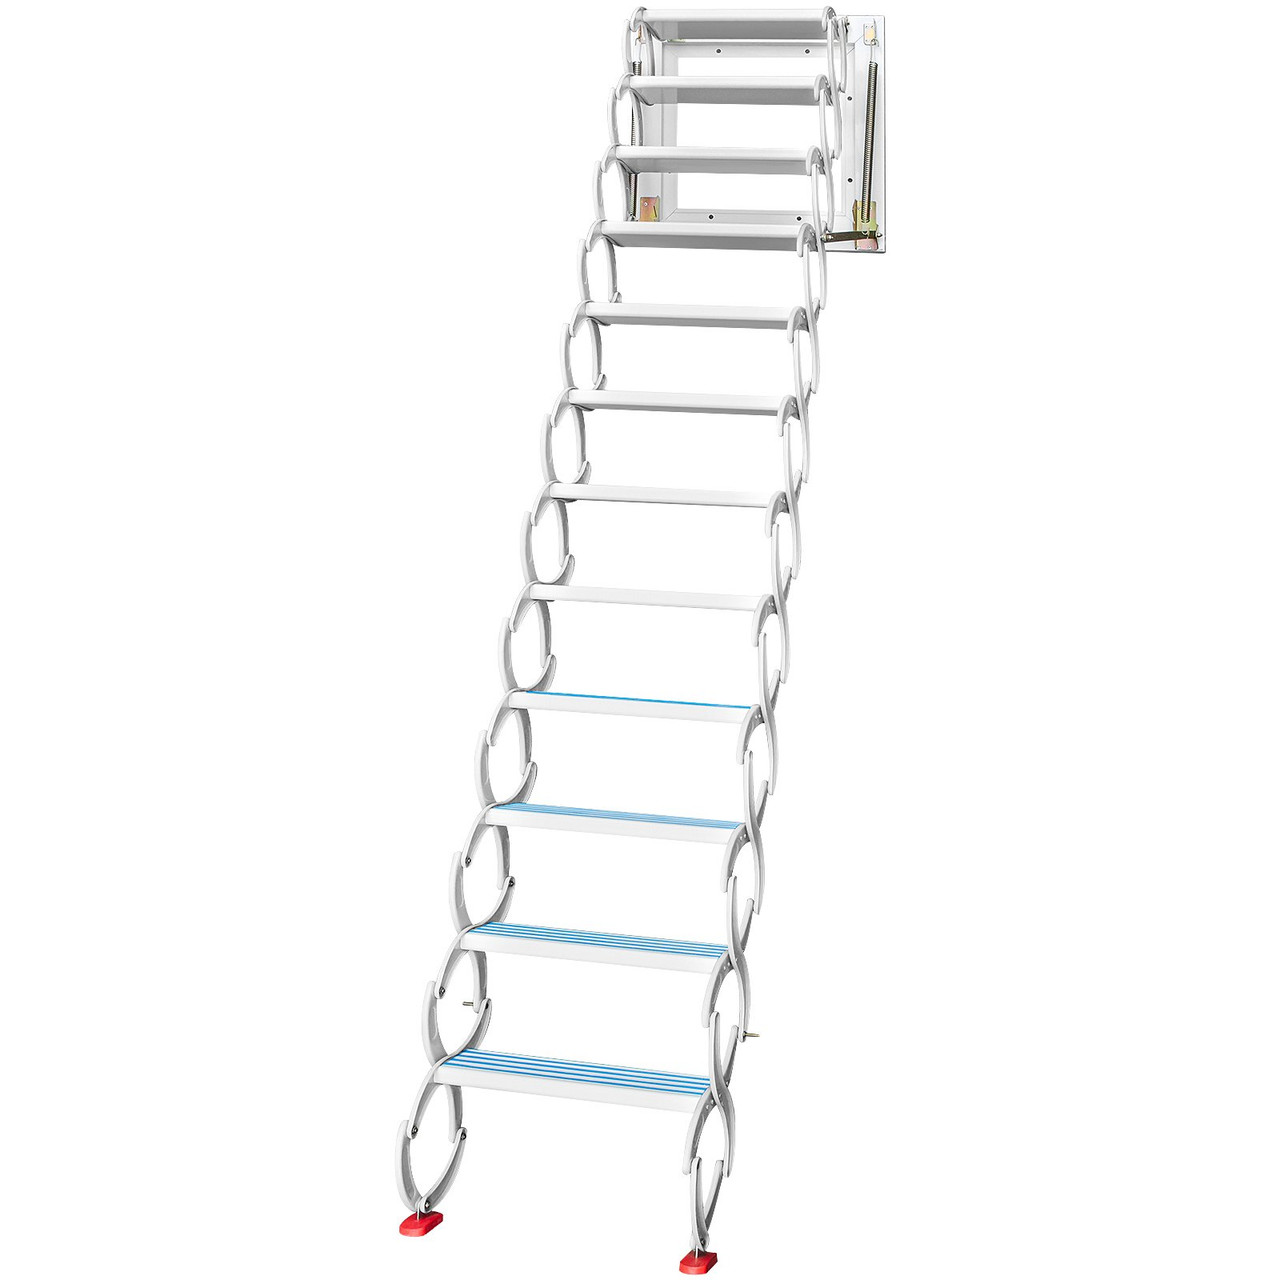 VEVOR Attic Steps Pull Down 12 Steps Attic Stairs Alloy Attic Access Ladder, White Pulldown Attic Stairs, Wall-mounted Folding Stairs for Attic, Retractable Attic Ladder with Armrests, 9.8 feet Height